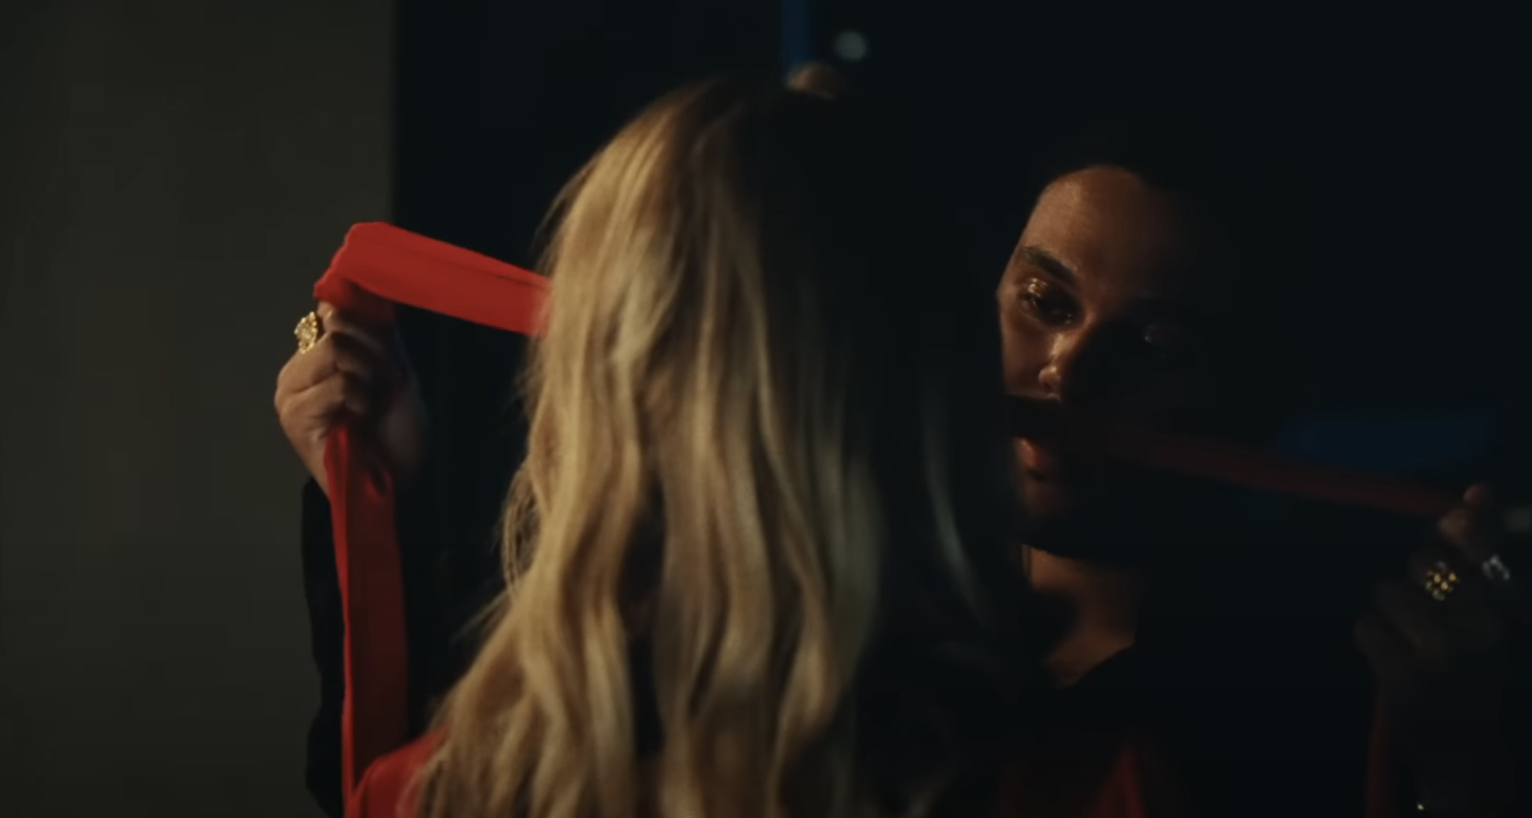 The Weeknd&#x27;s character holds a blindfold up to a female character